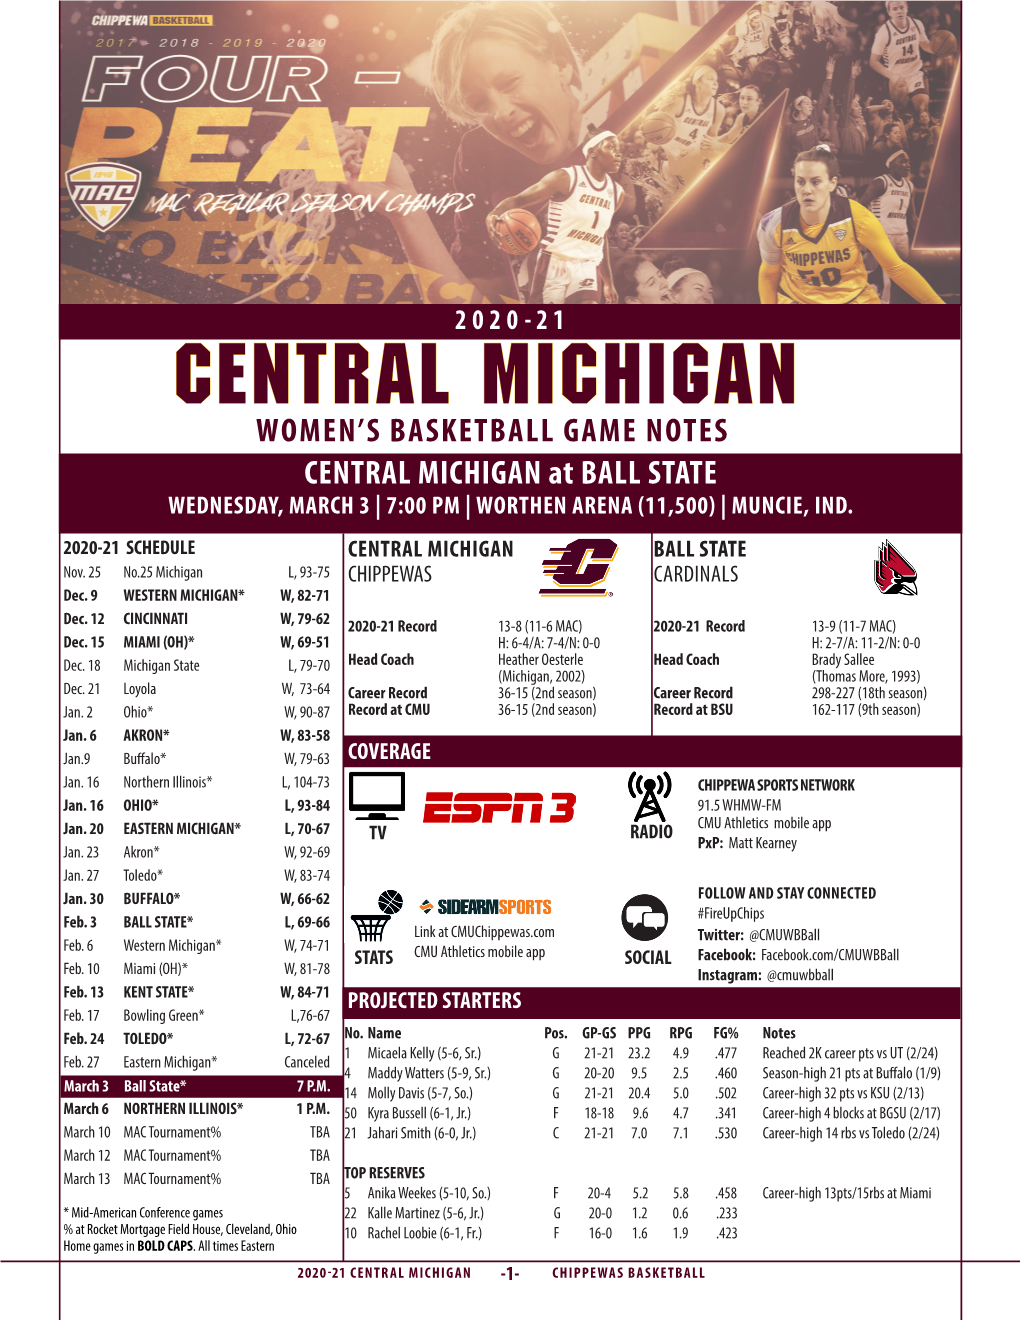 CENTRAL MICHIGAN WOMEN’S BASKETBALL GAME NOTES CENTRAL MICHIGAN at BALL STATE WEDNESDAY, MARCH 3 | 7:00 PM | WORTHEN ARENA (11,500) | MUNCIE, IND